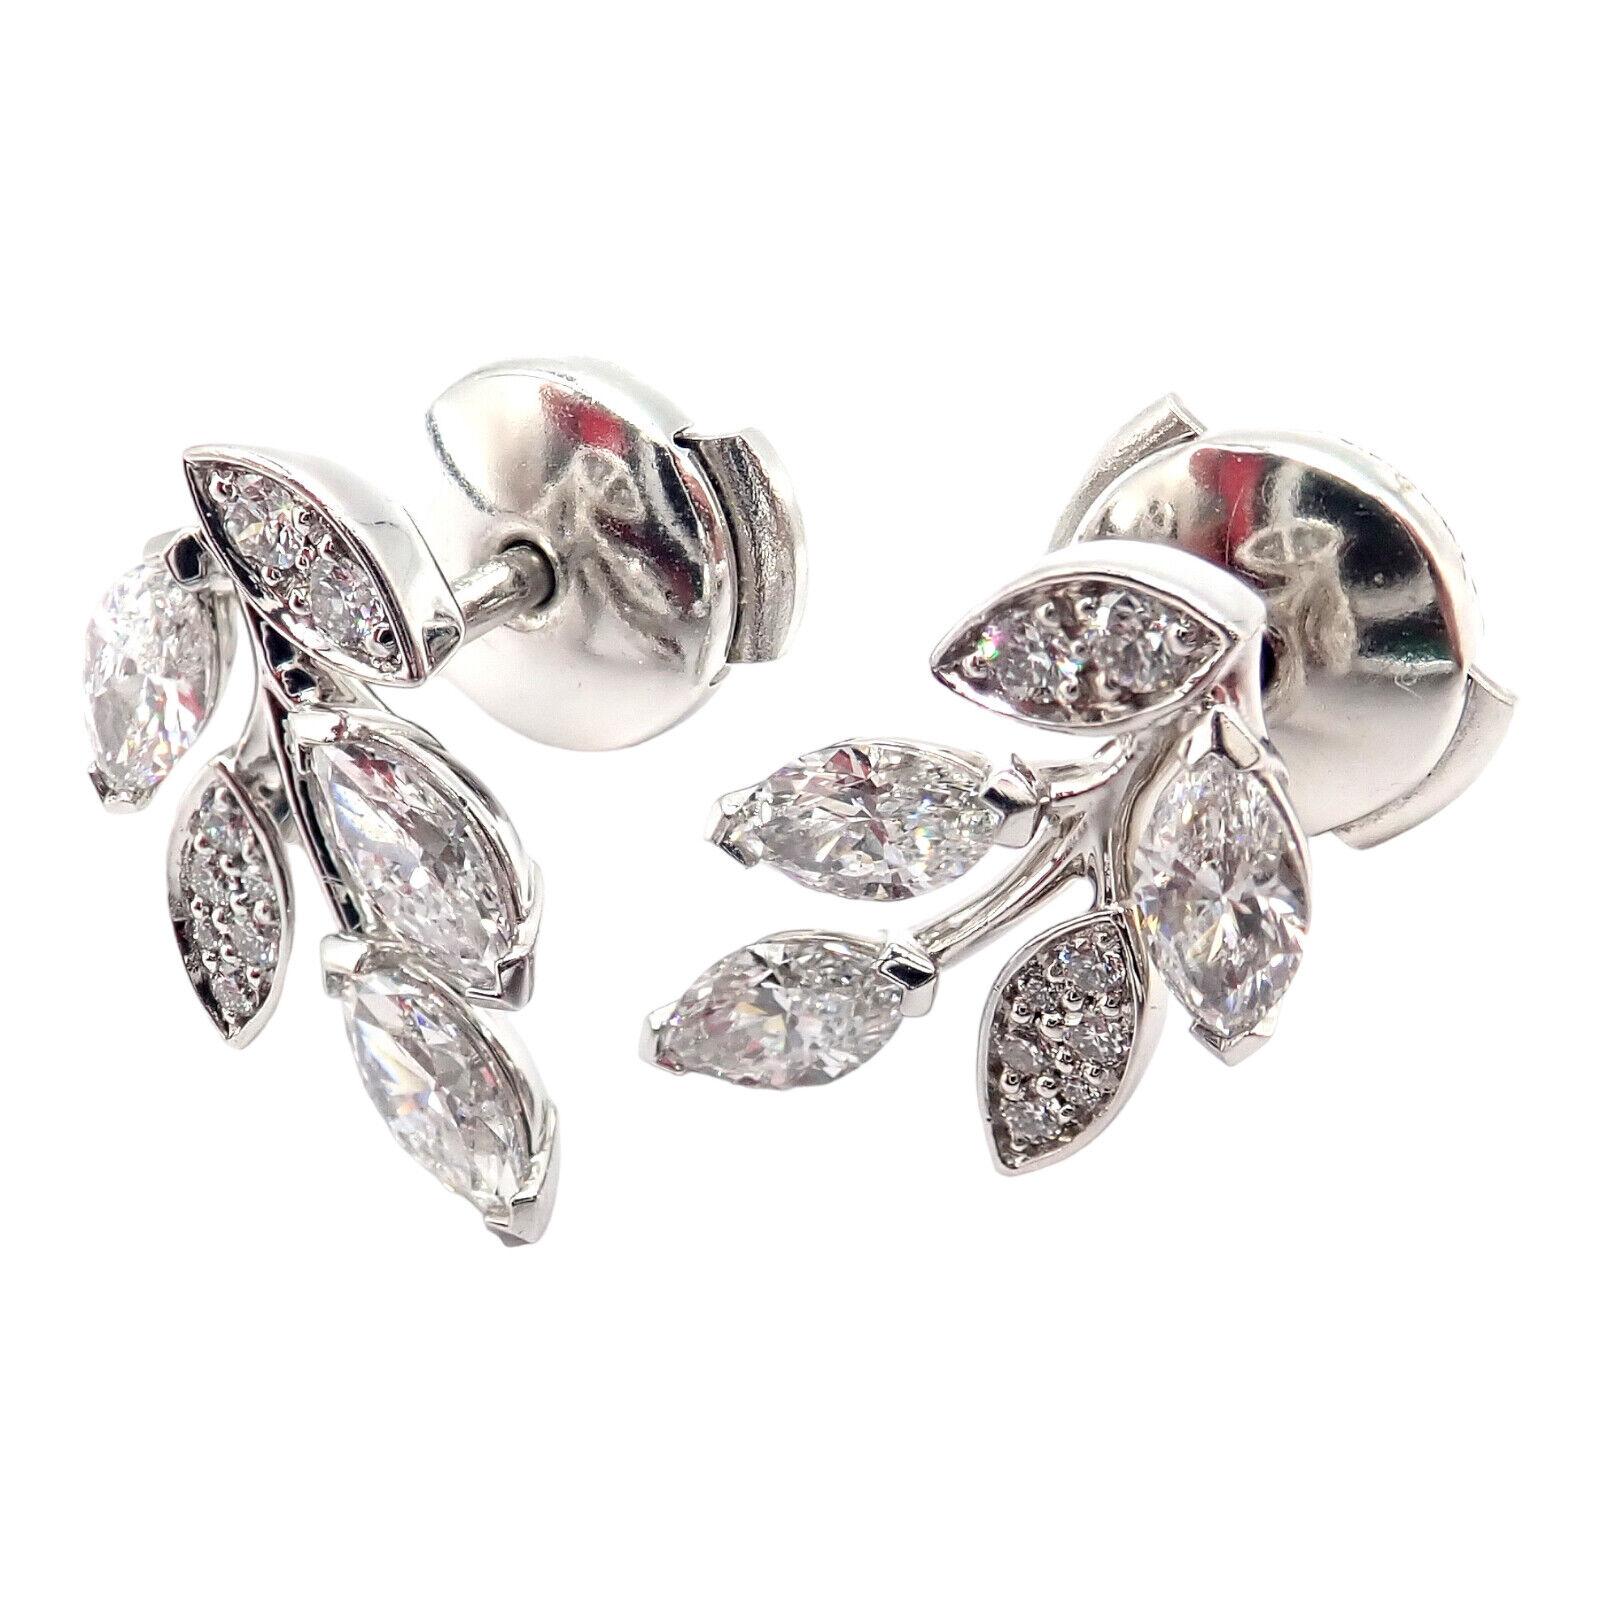 Platinum Victoria Vine Diamond  Small Earrings by Tiffany & Co. 
With round brilliant cut diamonds and marque cut diamonds VS1 clarity, E color total weight approximately .64ct
Authentic Tiffany & Co's Victoria Vine earrings, artfully crafted in